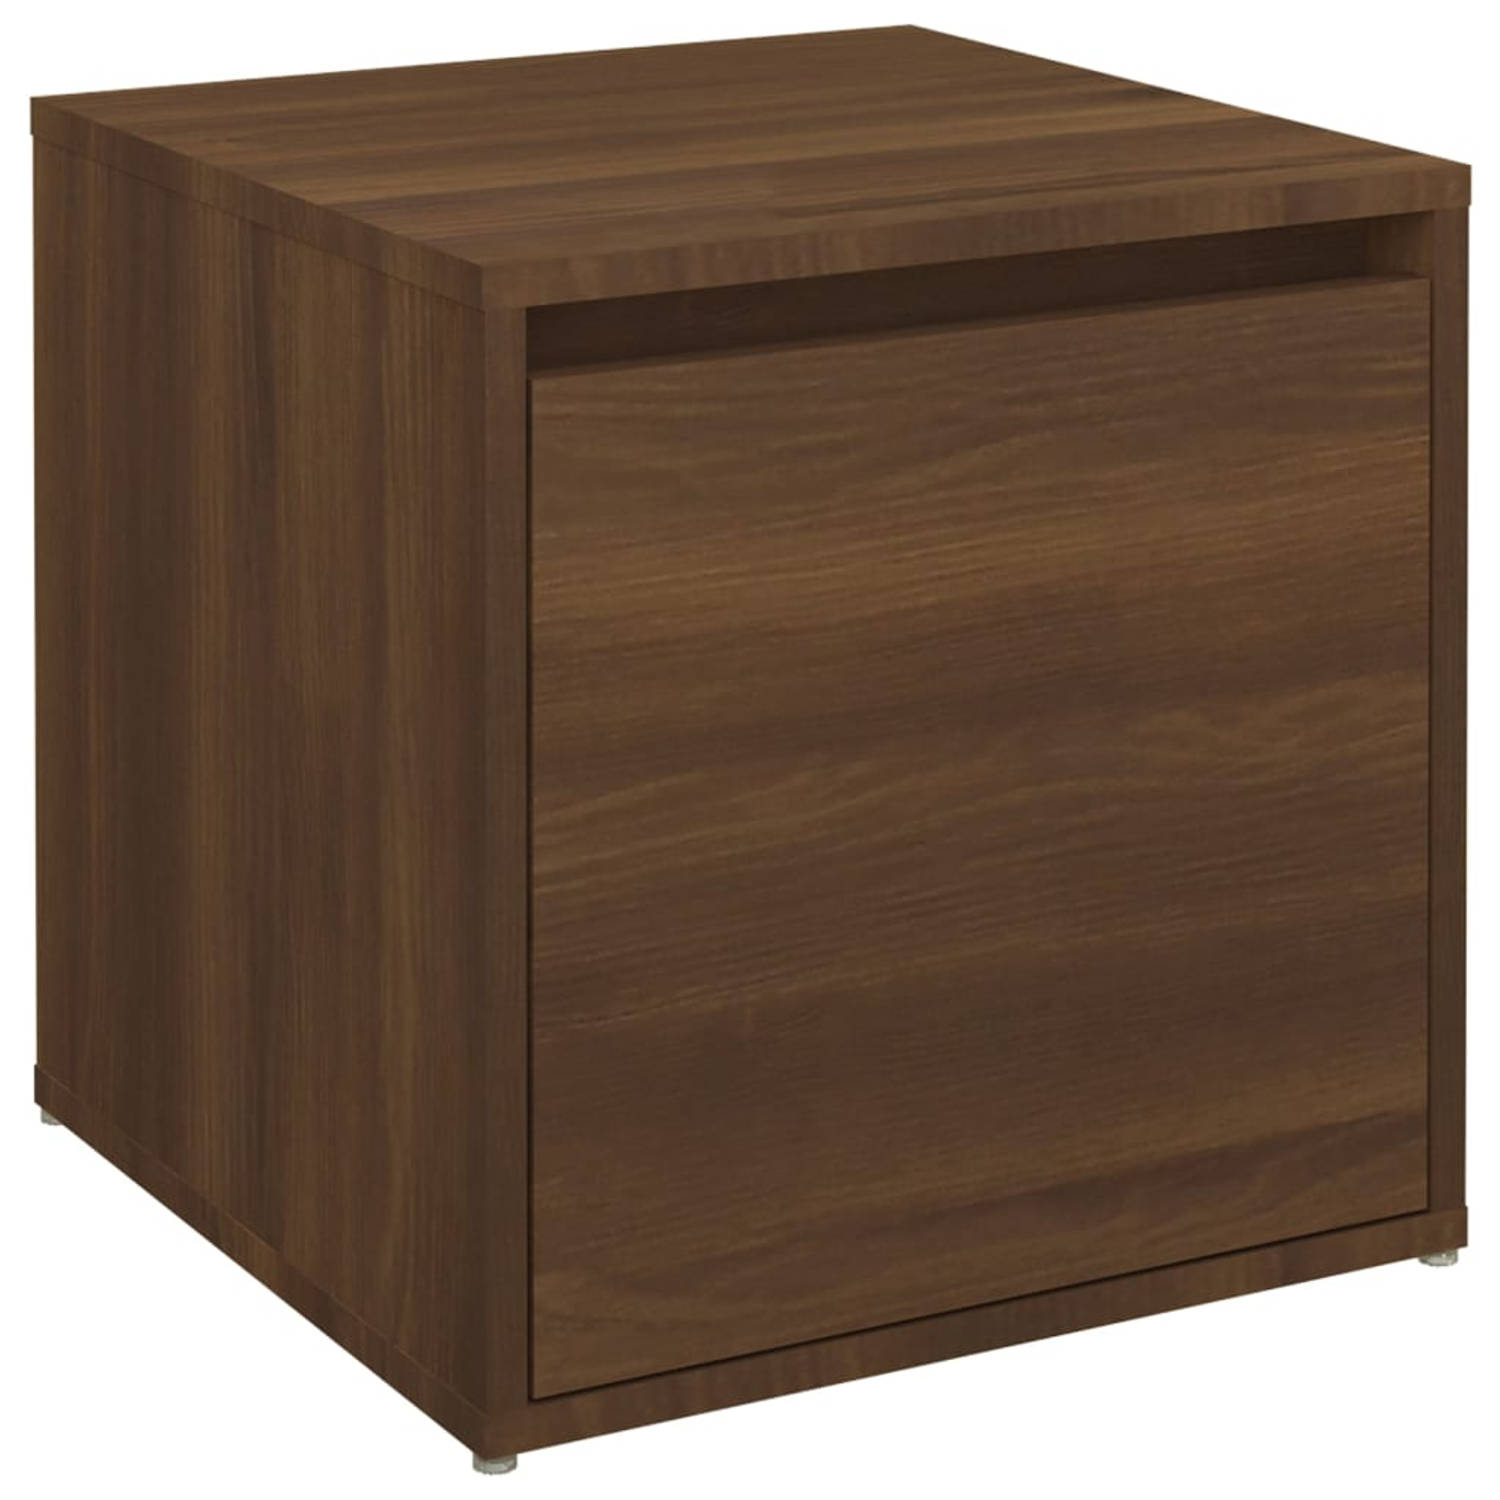 The Living Store Opbergbox Hout - 40.5 x 40 x 40 cm